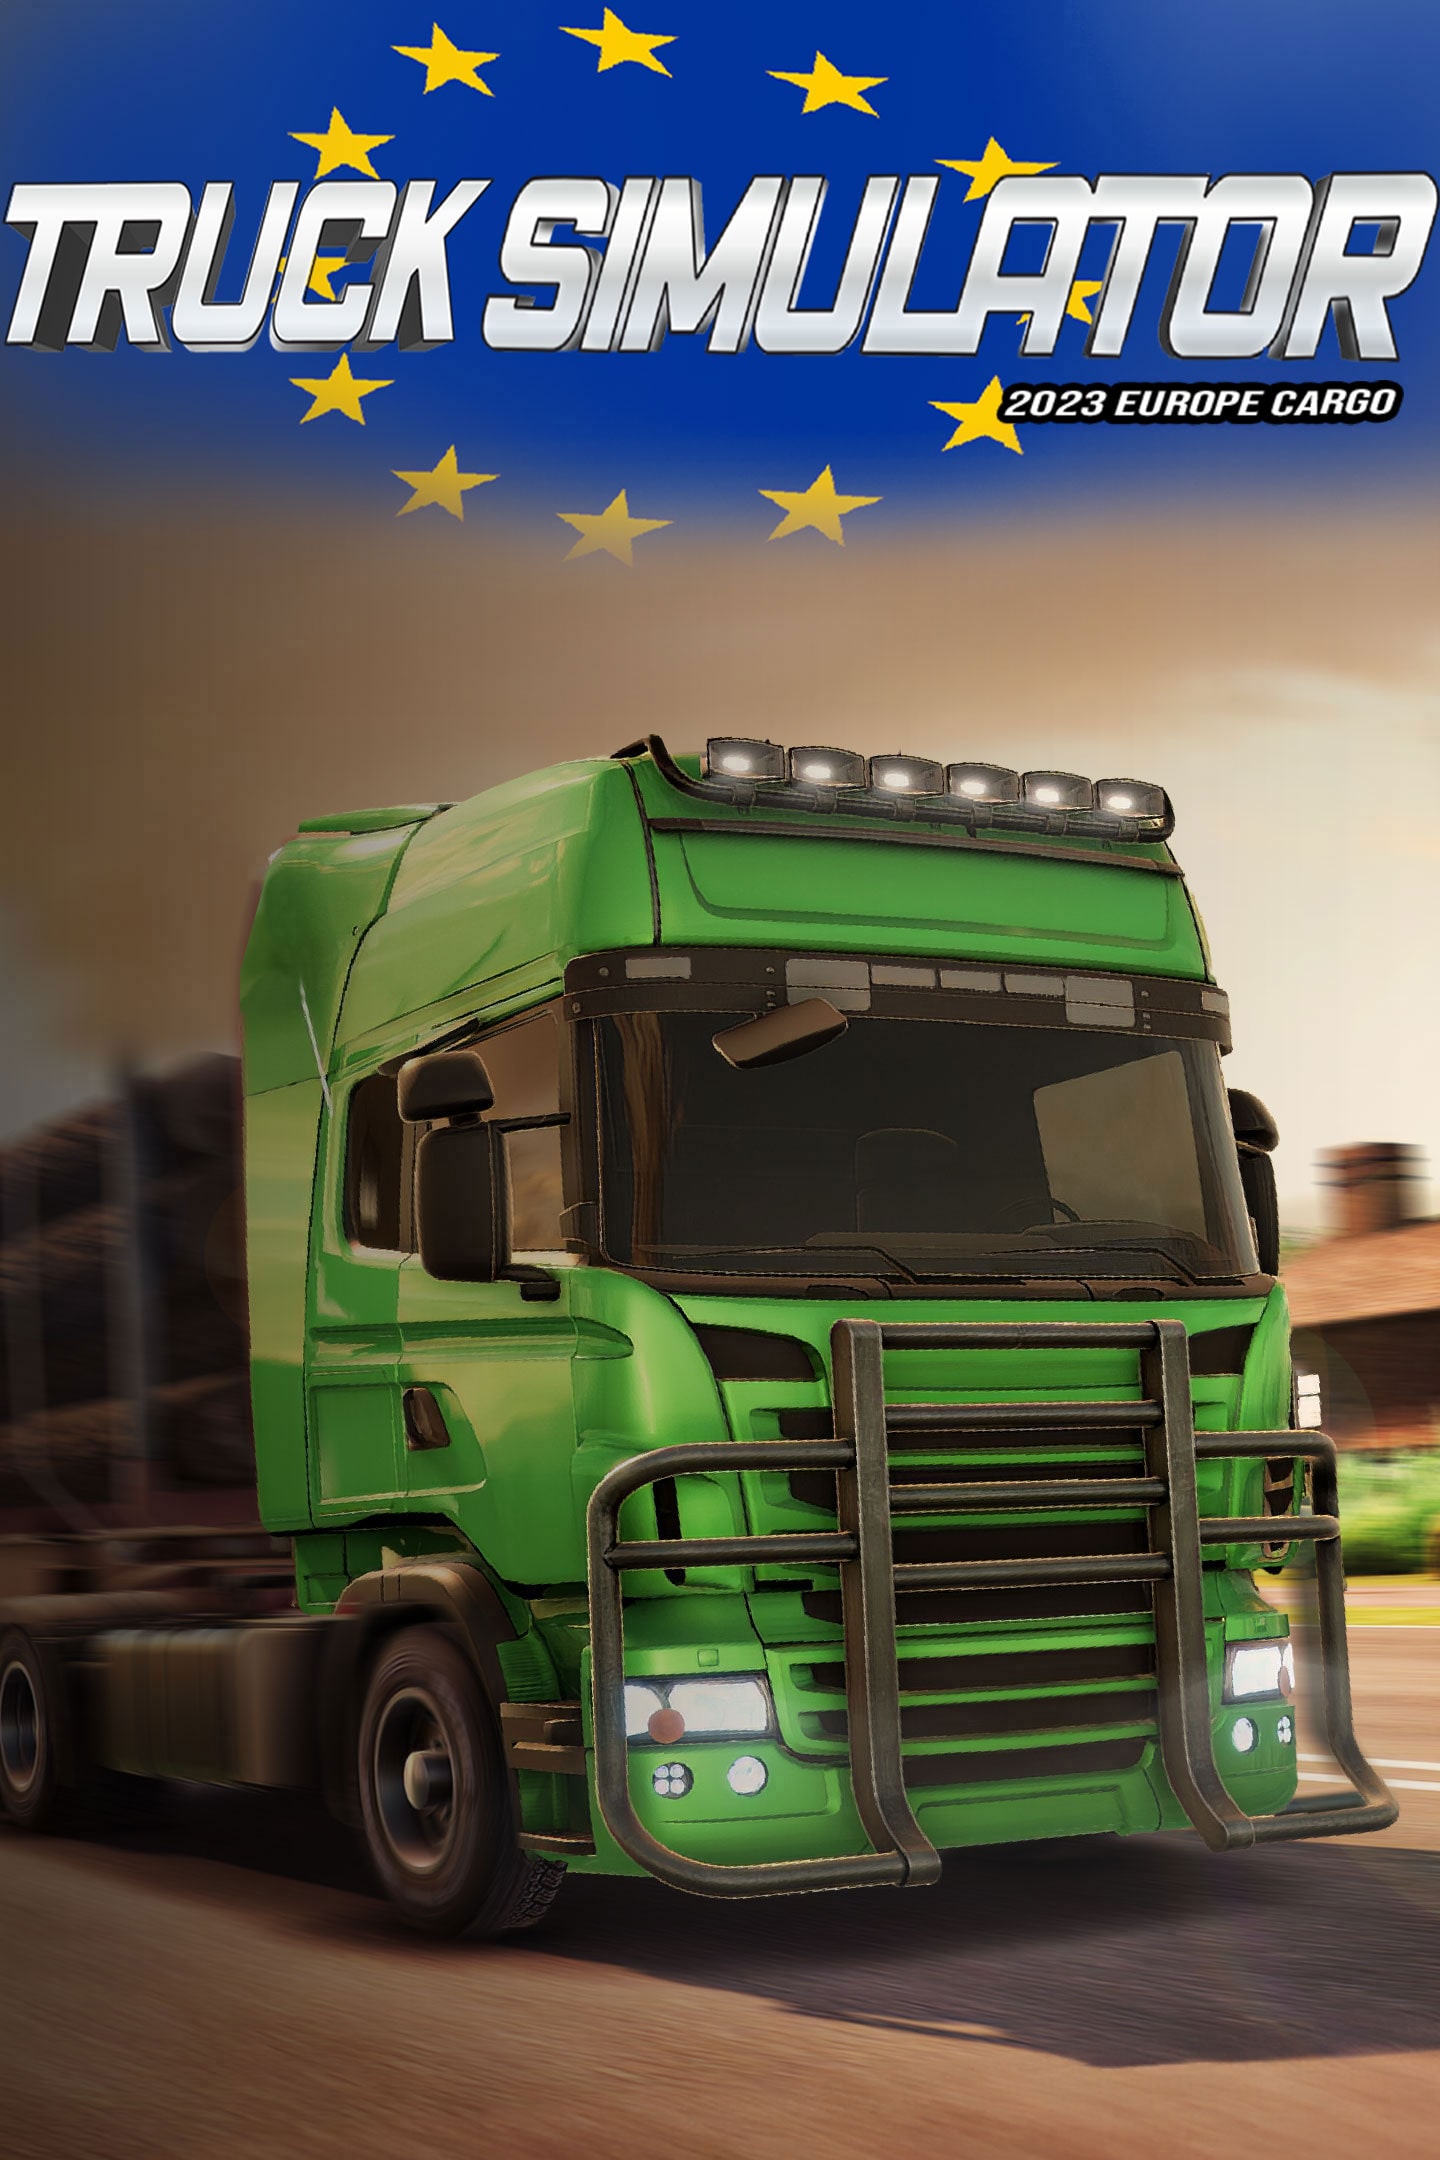 Euro Truck Simulator 2 Ps4 - Achat neuf ou d'occasion pas cher